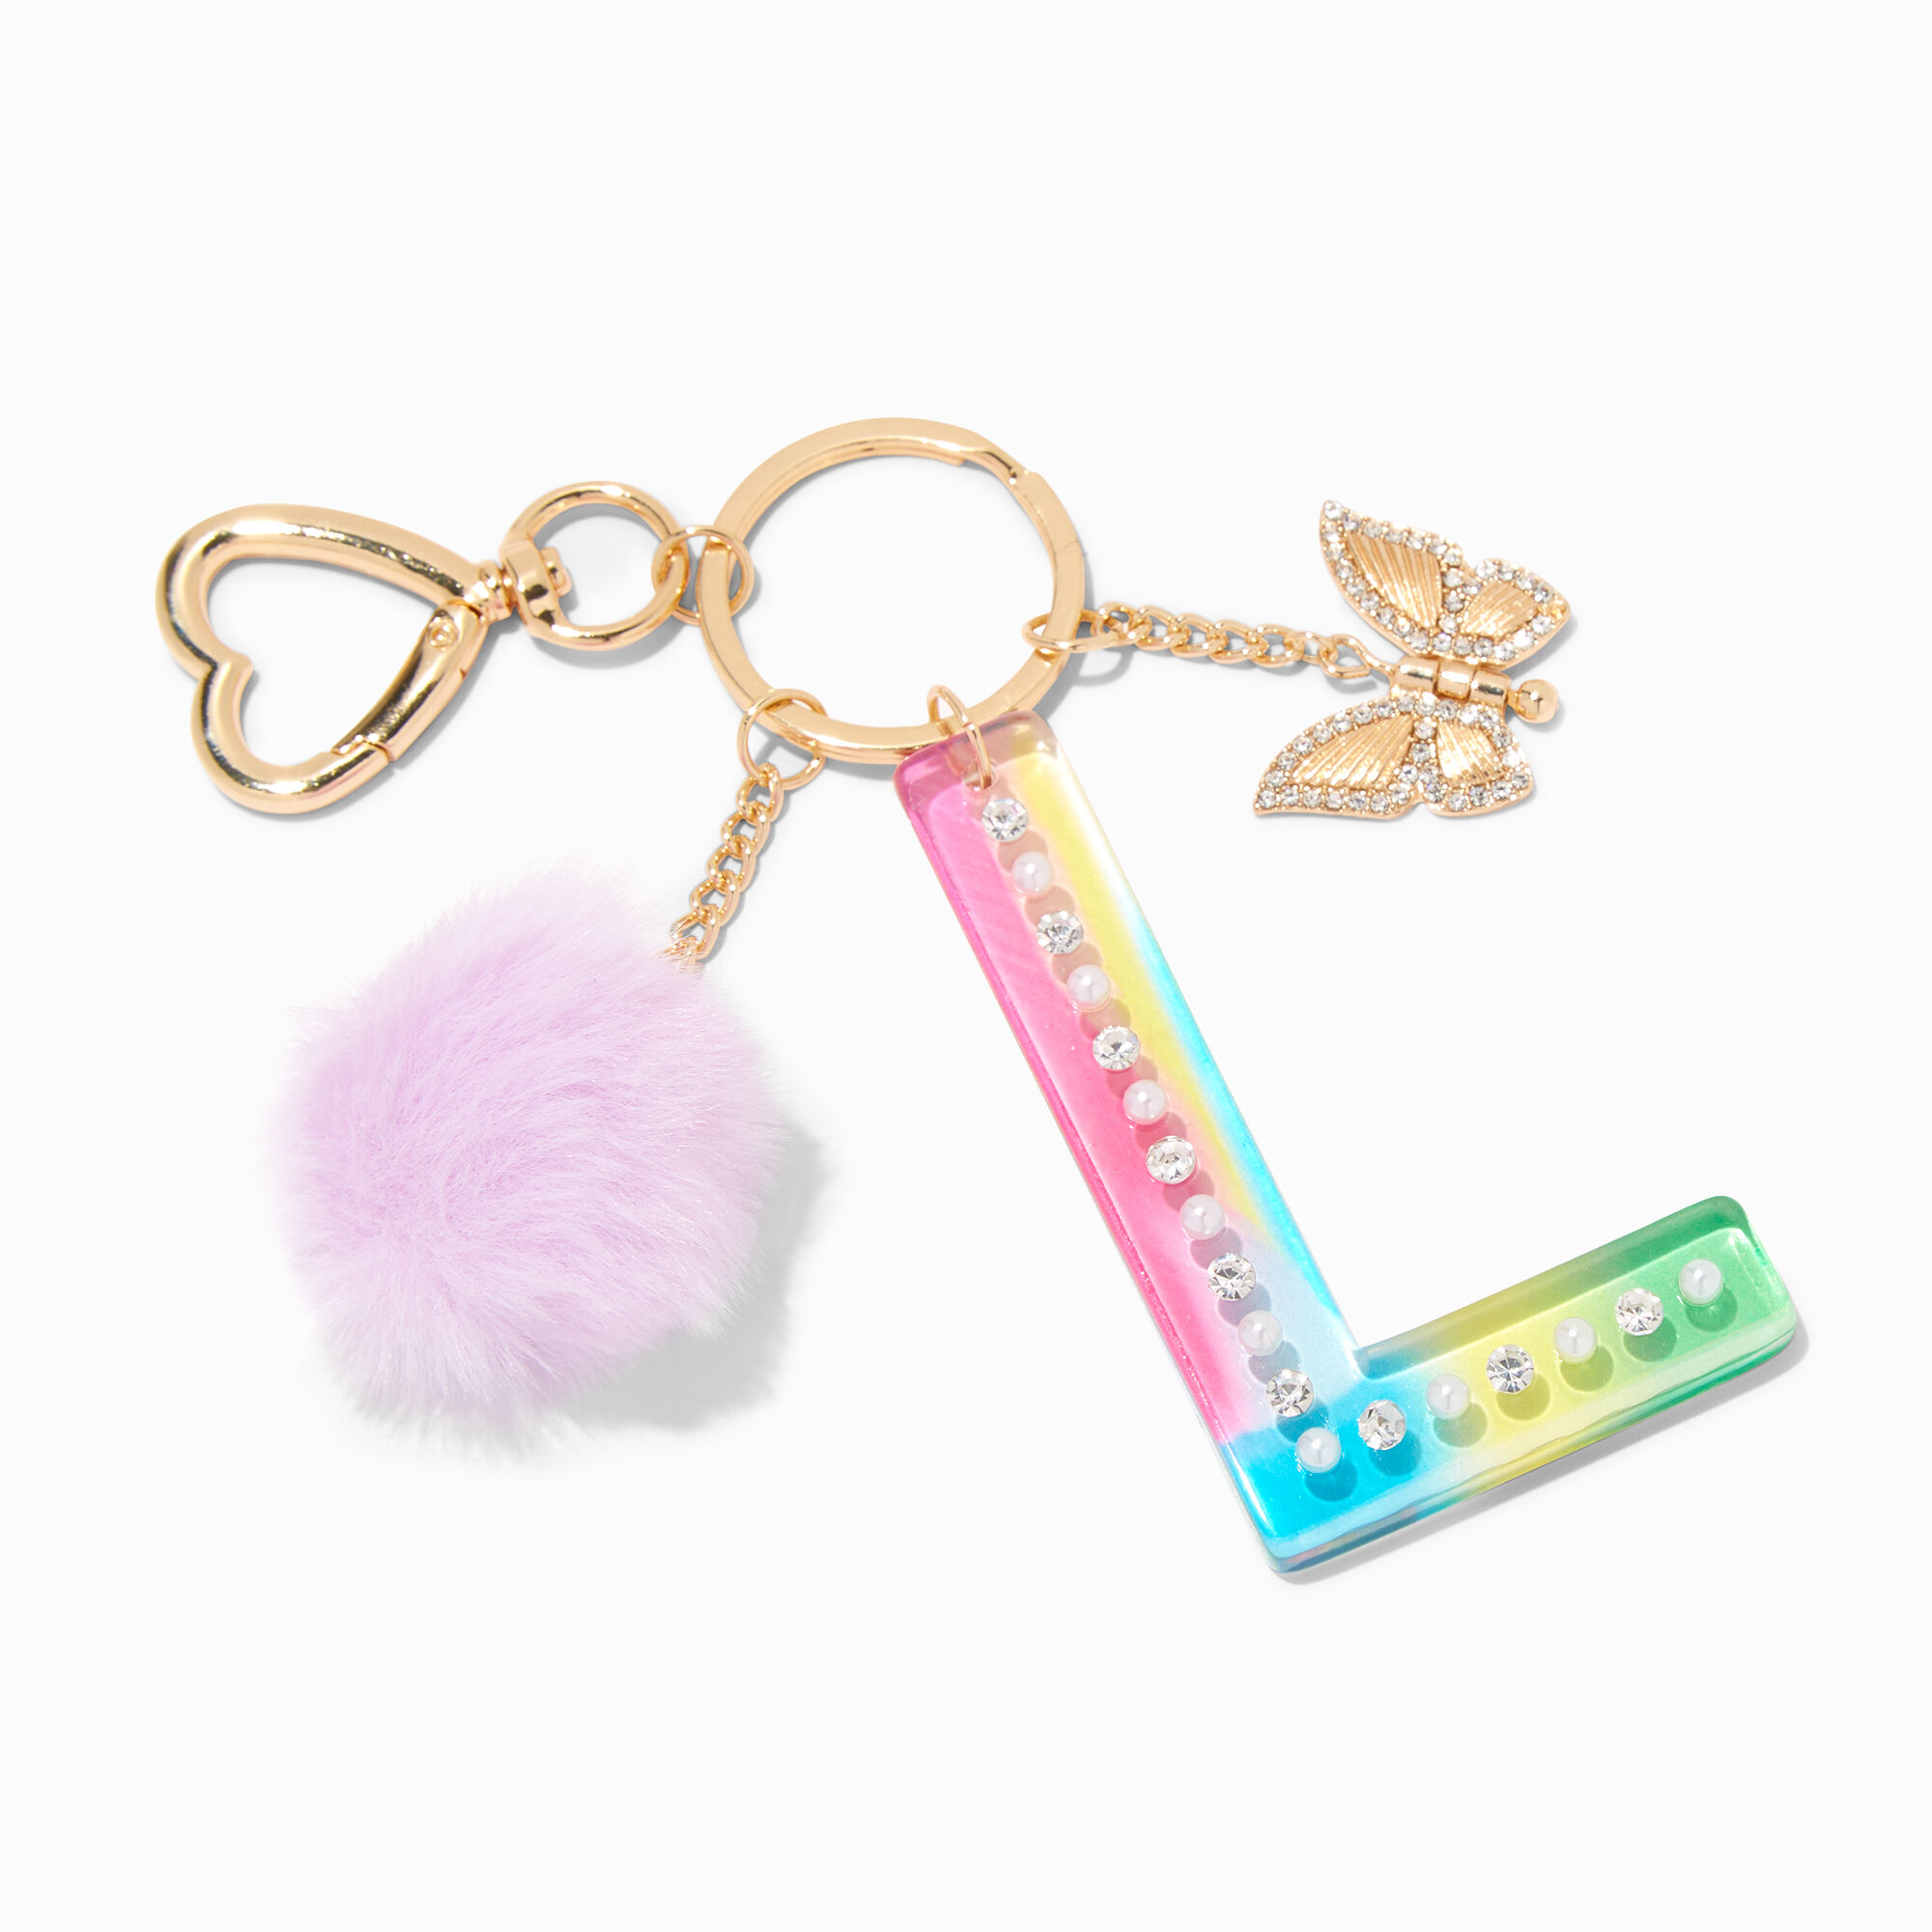 Cube Keychain Kit Refill - Rainbow - $9.00 : The Beading Butterfly, Beaded  Art and Jewelry by Kassie